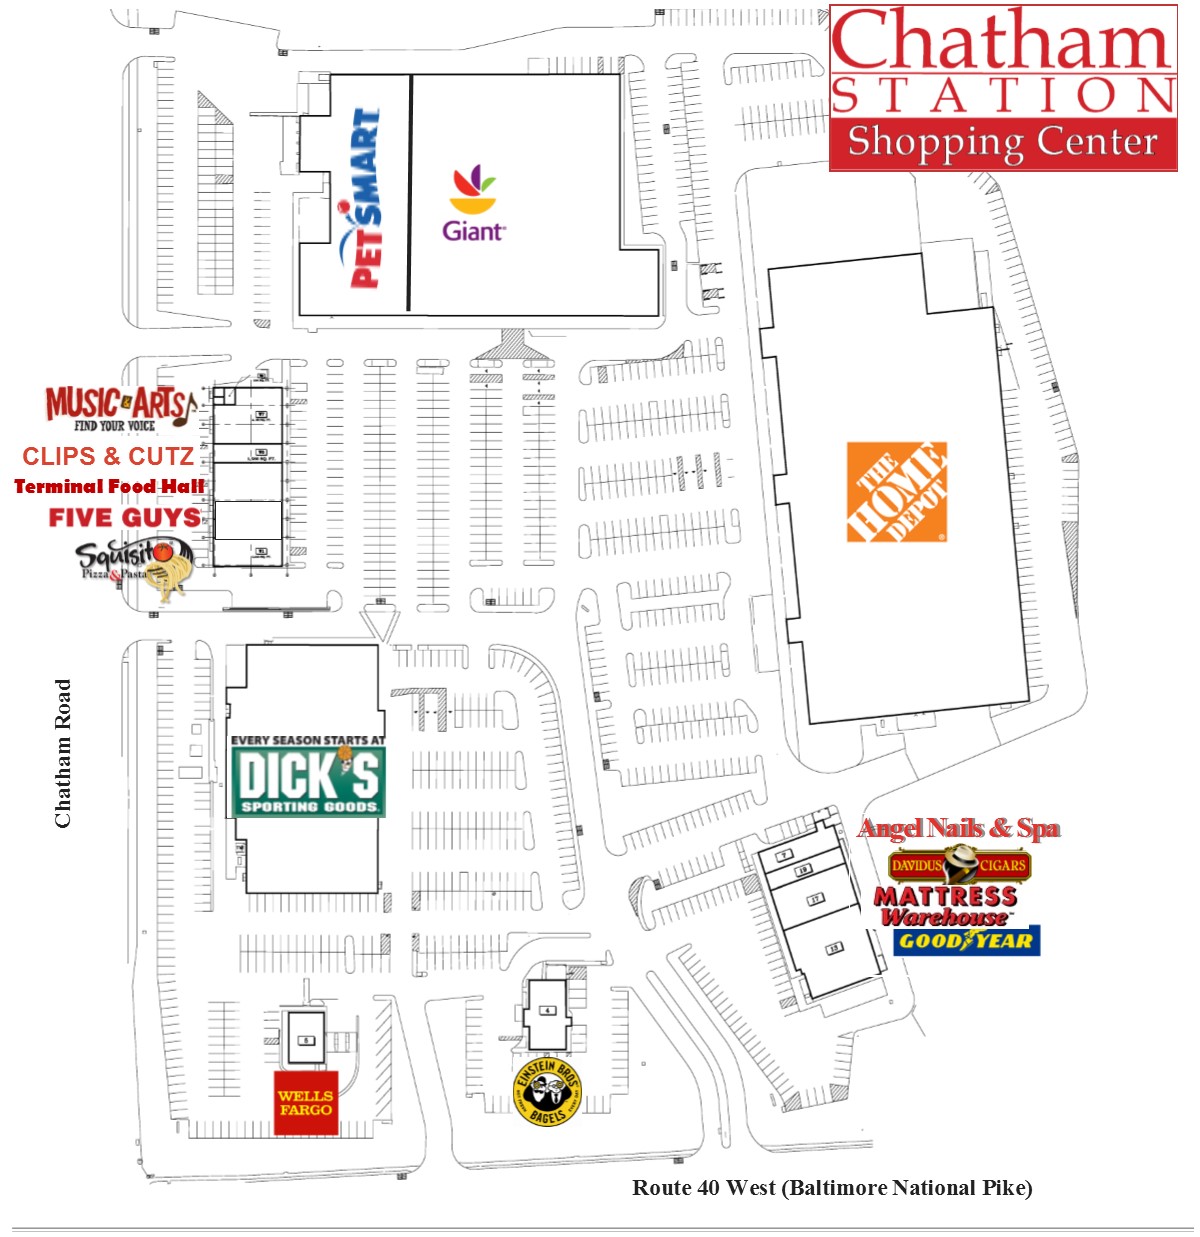 CSSC Site Plan With Stores 6.22